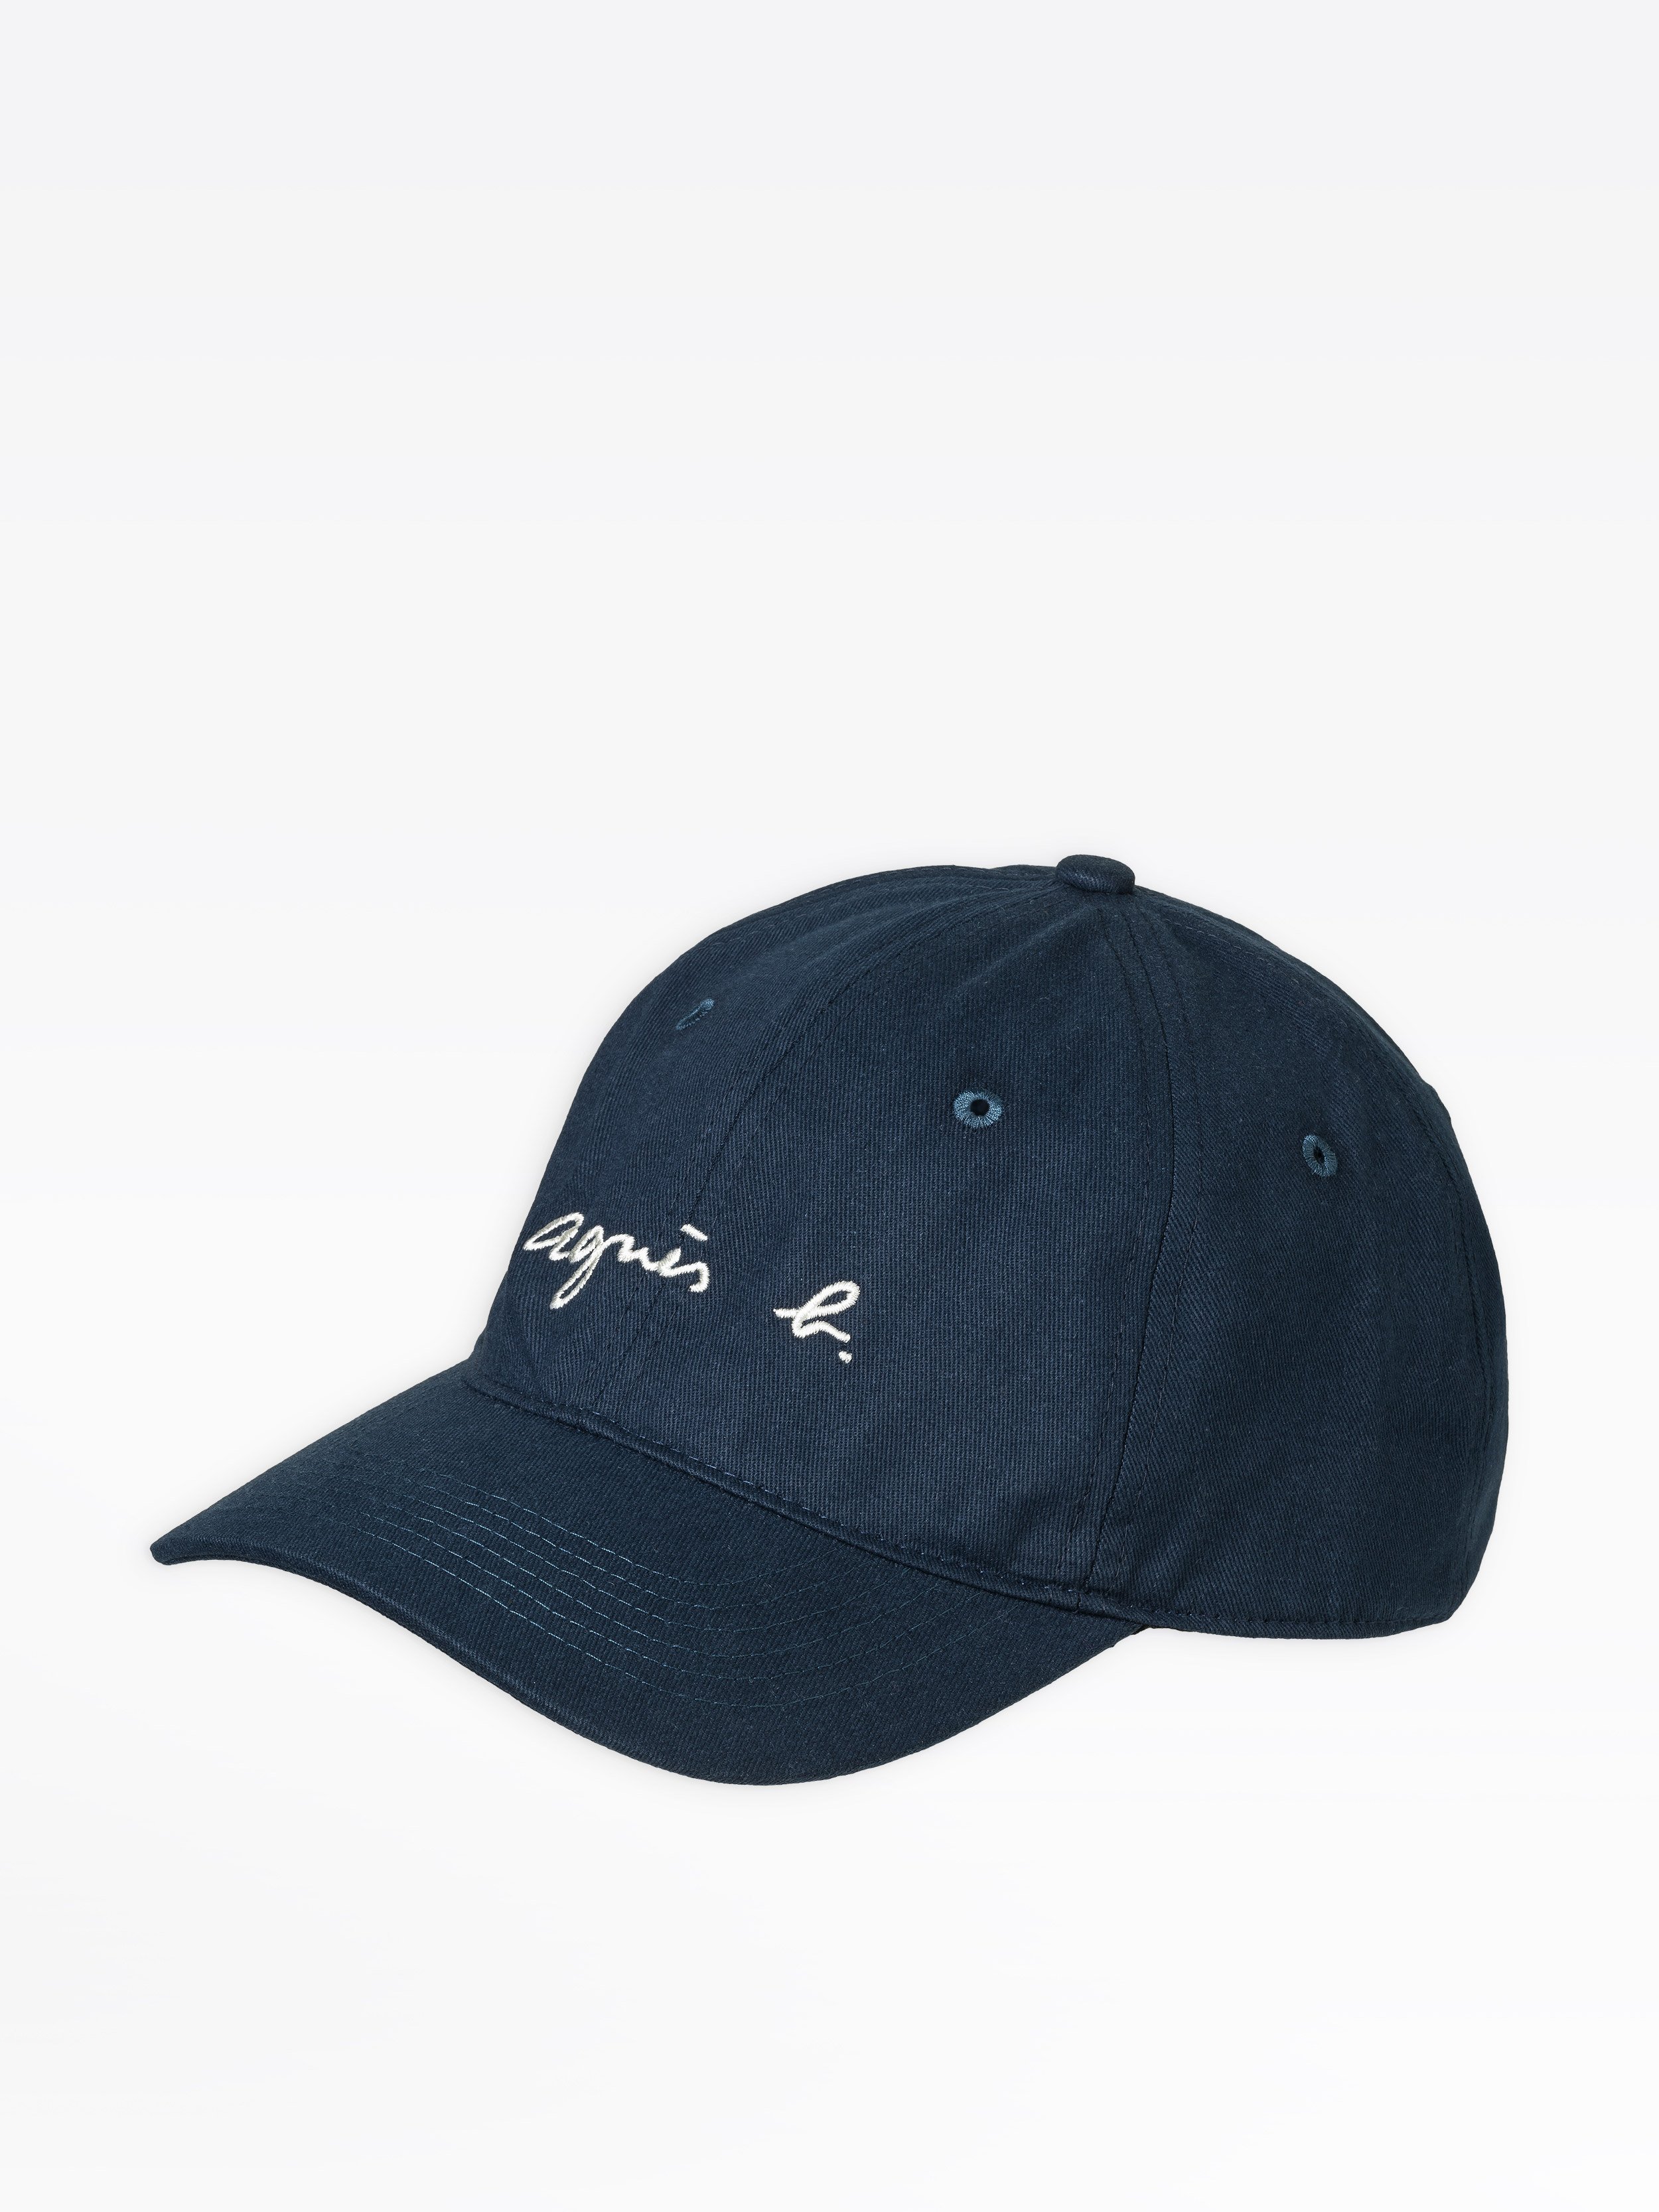 navy blue embroidered 